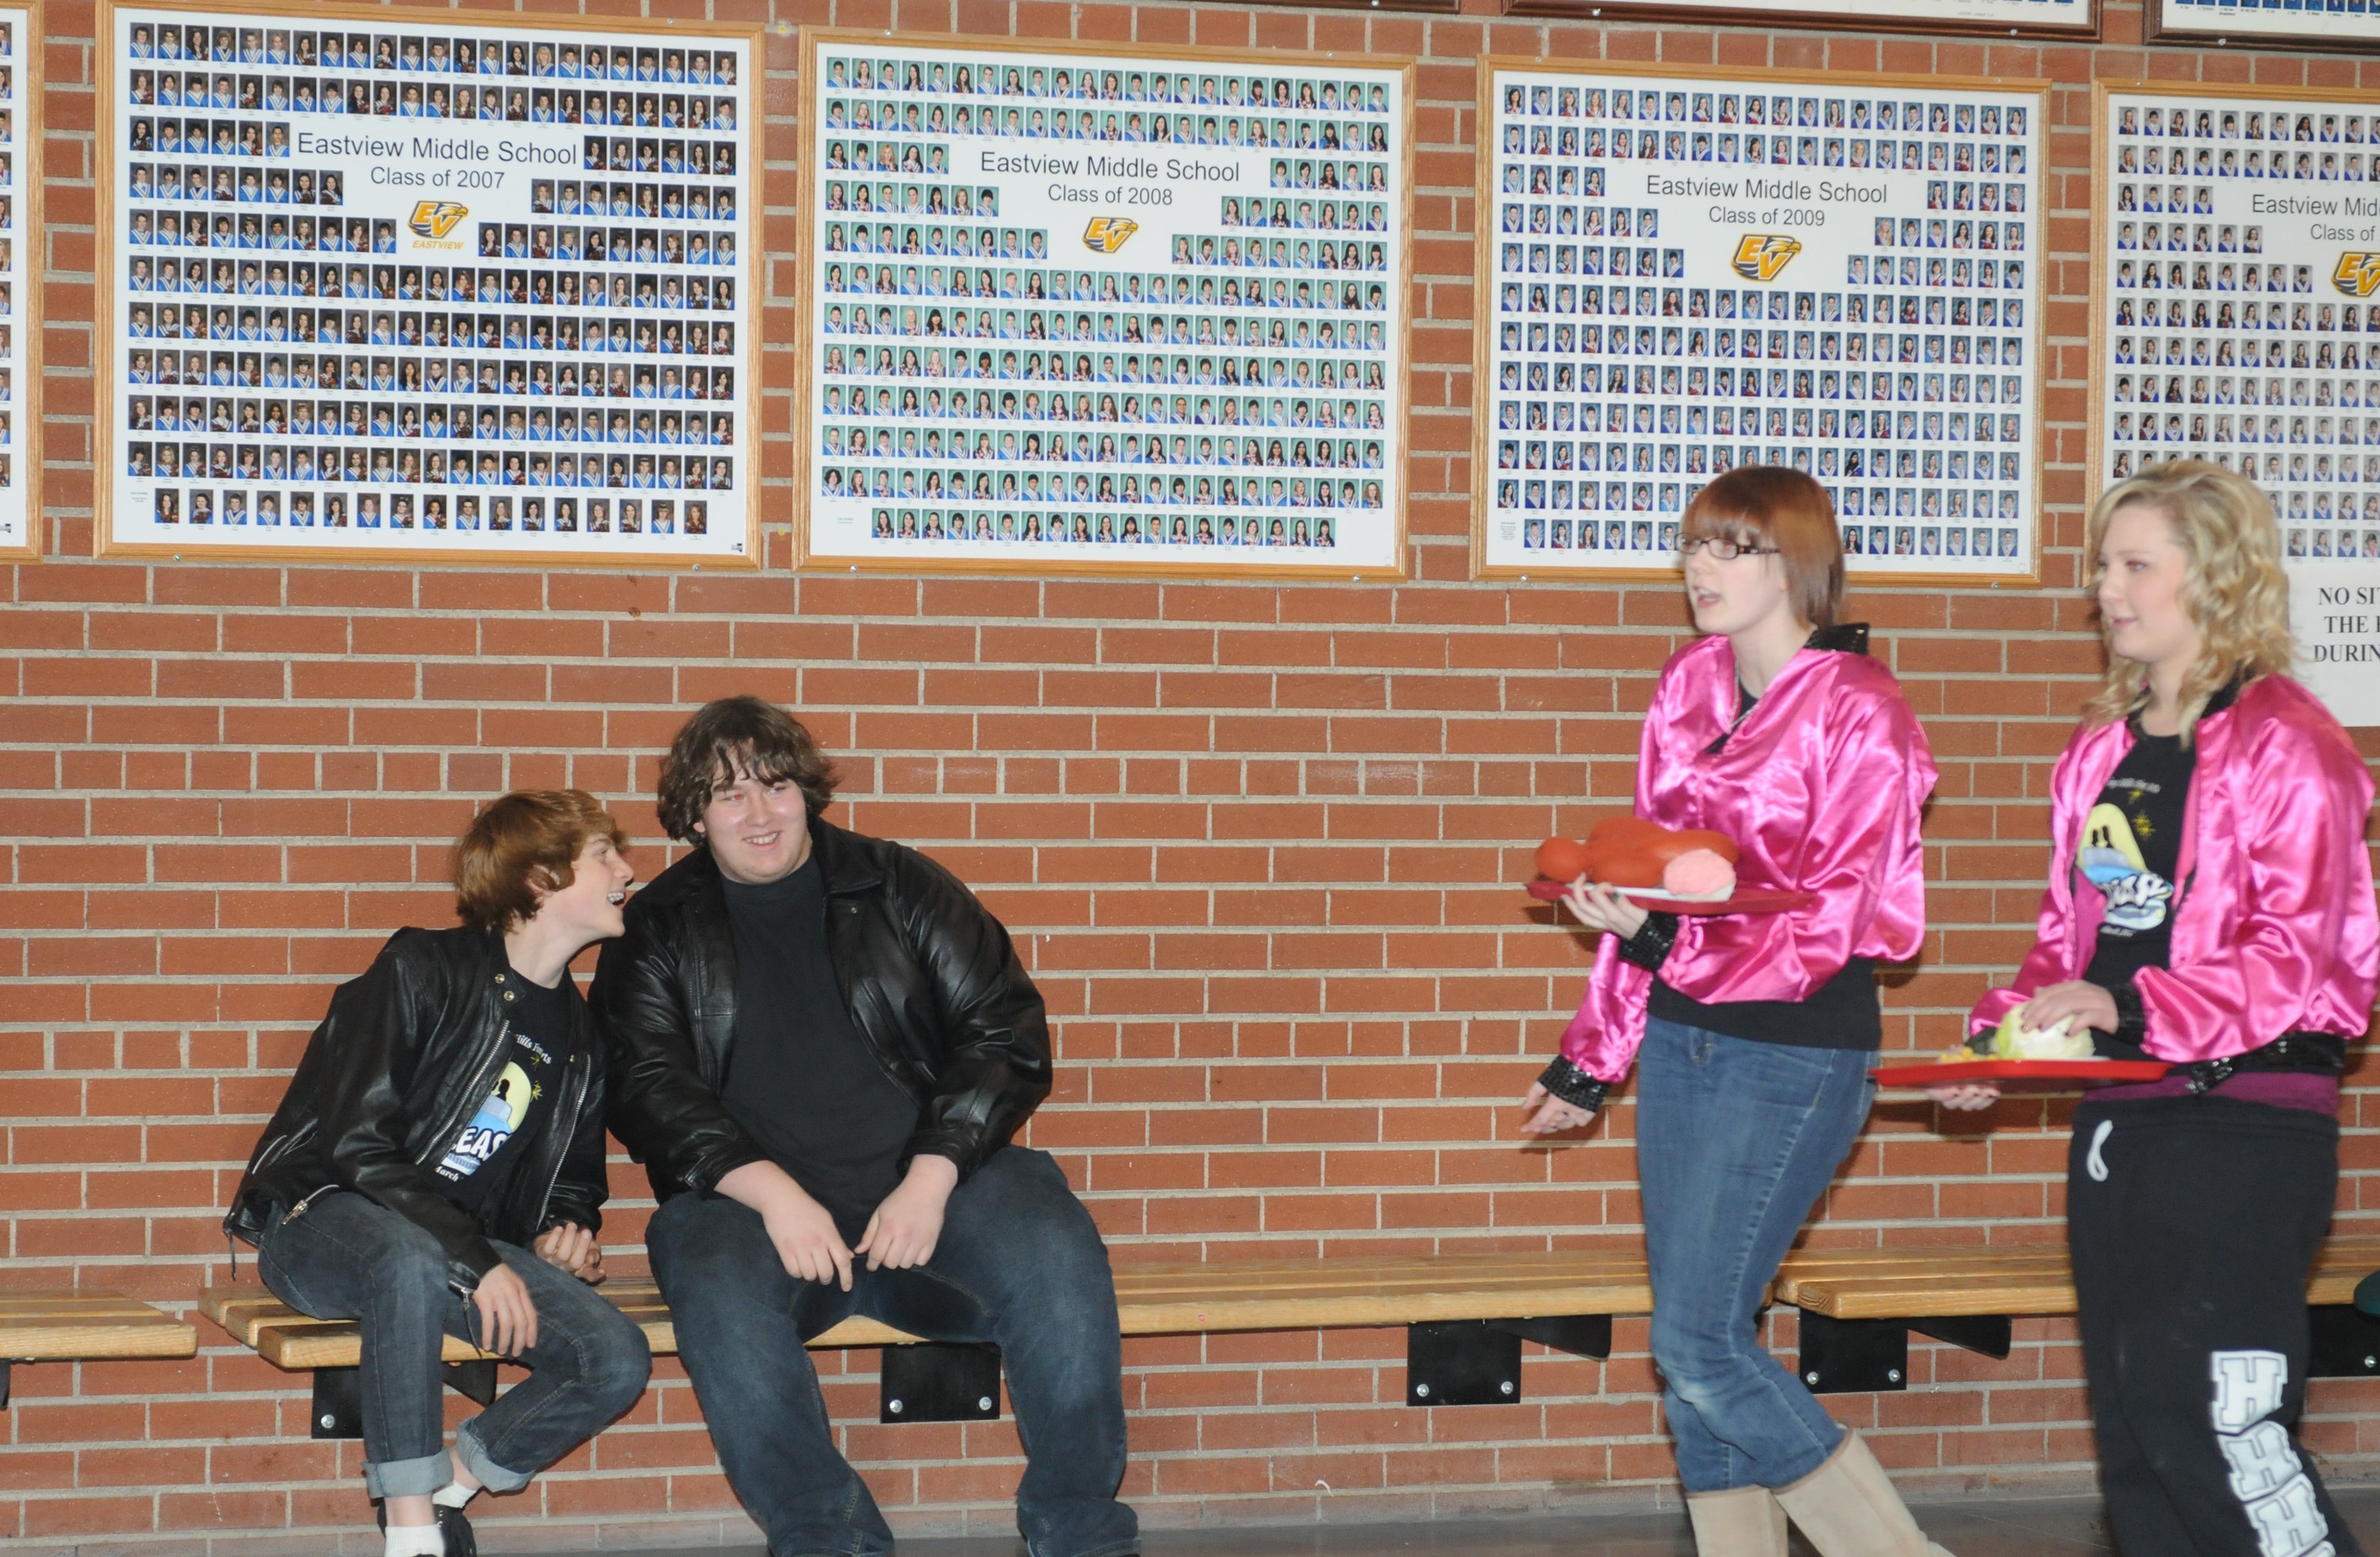 GREASE- Members of Hunting Hills High School practice for their upcoming play Grease at Eastview Middle School recently. The play is set for March.